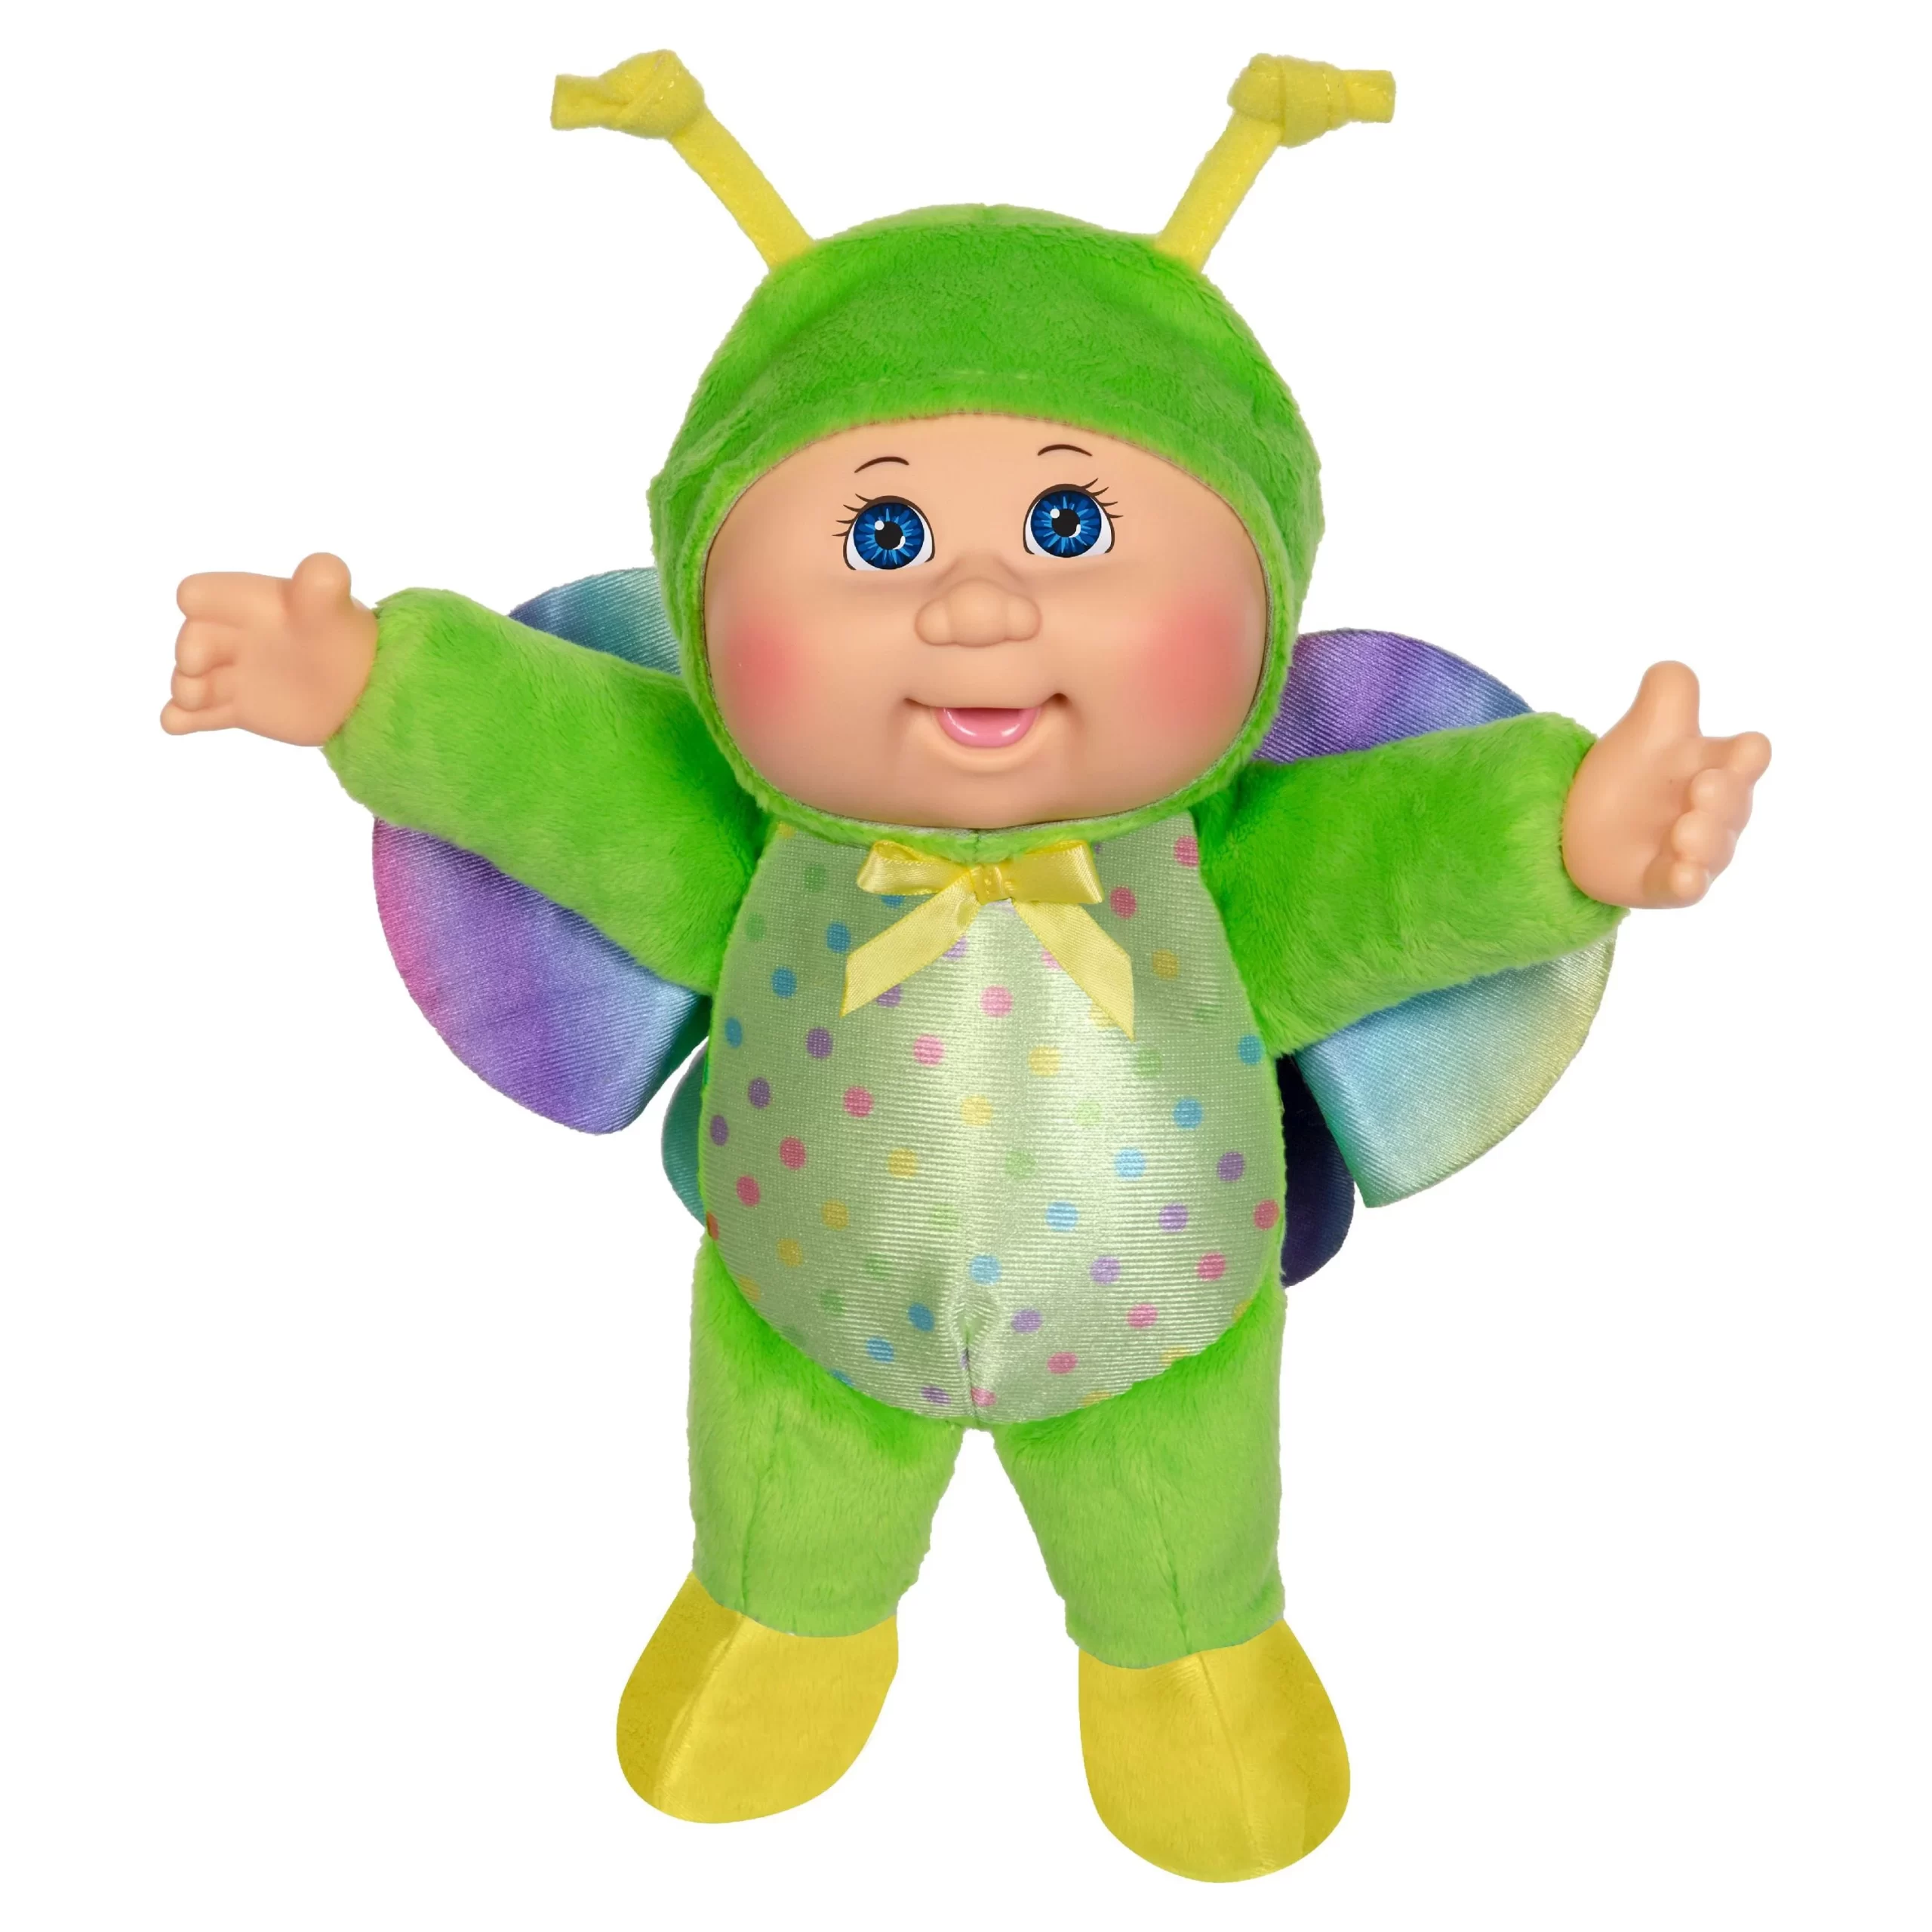 Cabbage Patch Kids Cuties Collection Stella the Butterfly Baby Doll Each Sold Separately ef2b6e0f 9efe 4260 892d 4278eee532e3.f907e7a989c817b58d54886b658cb3b3 scaled